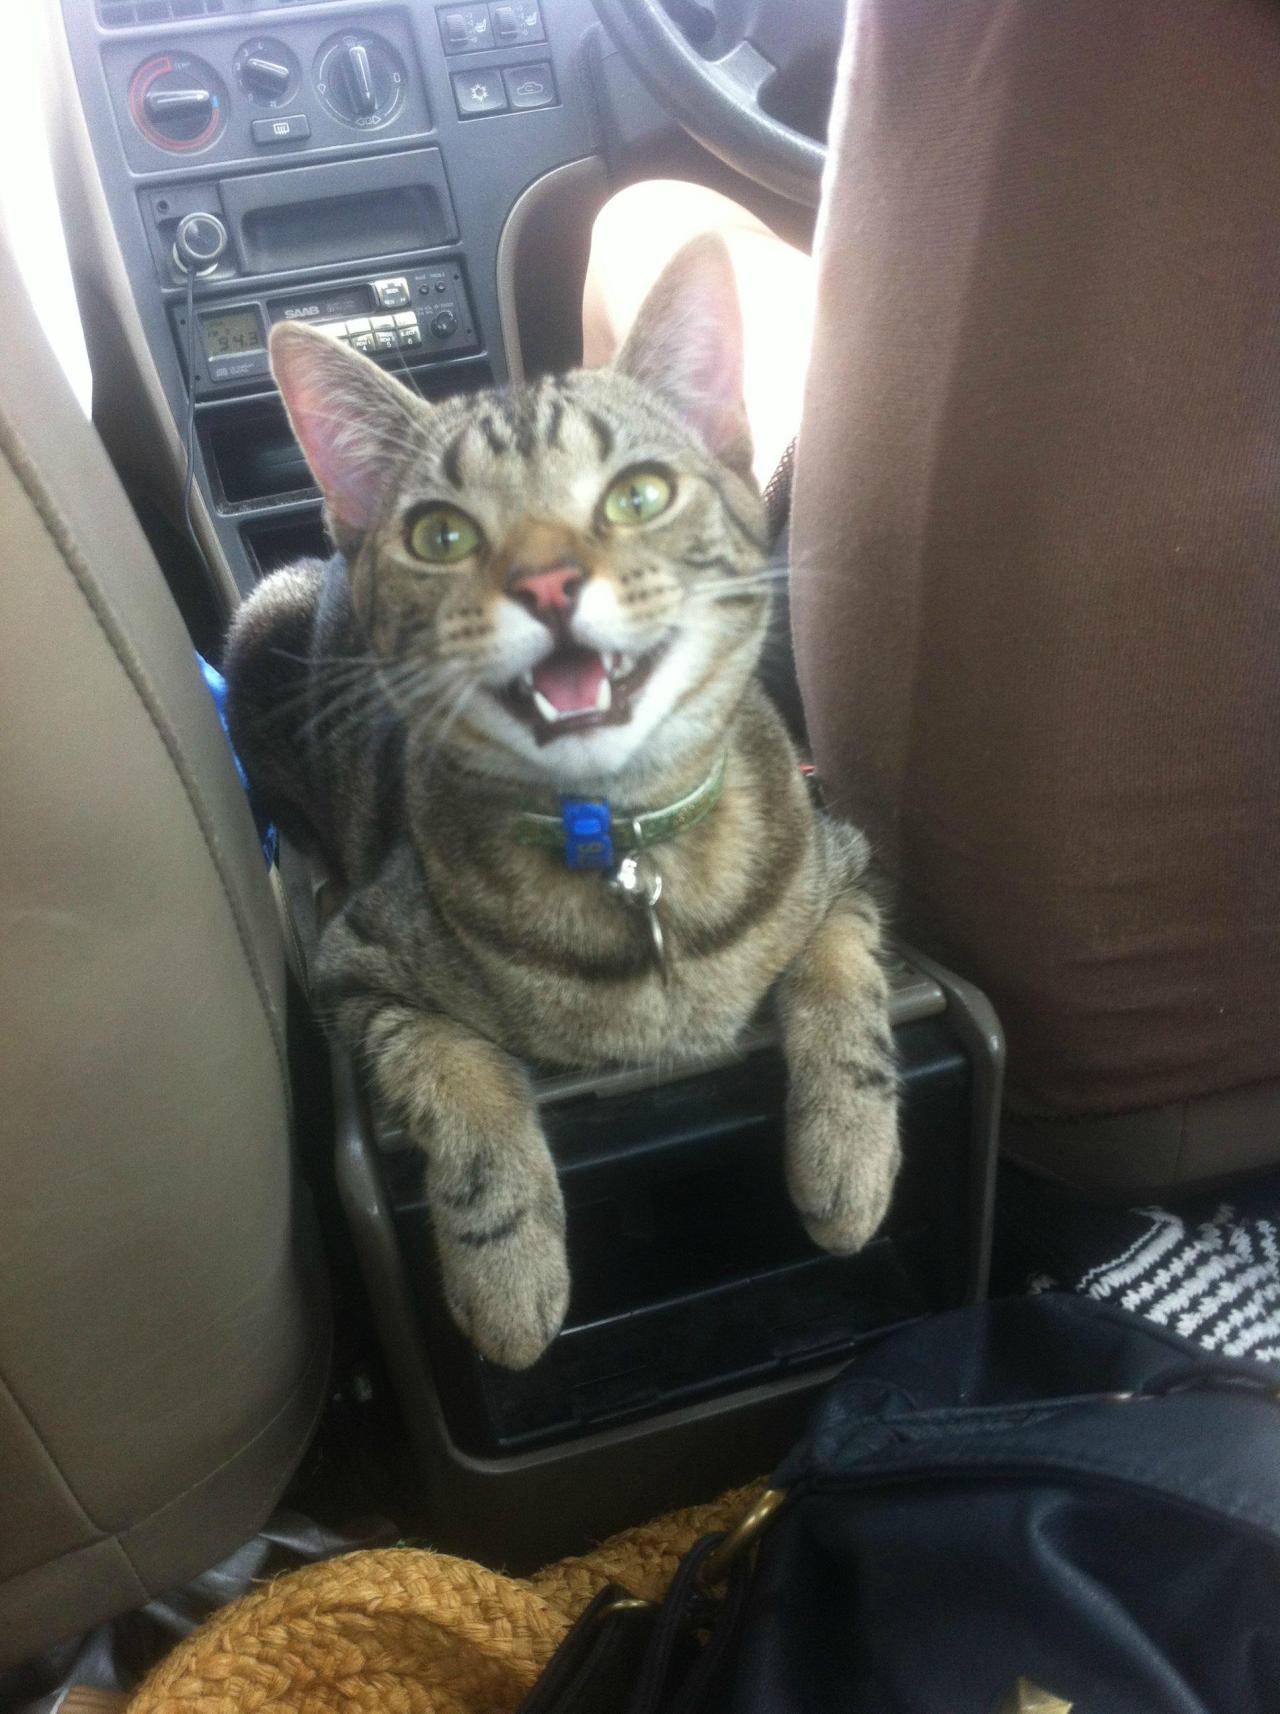 And we were worried he wouldn’t like the car ride